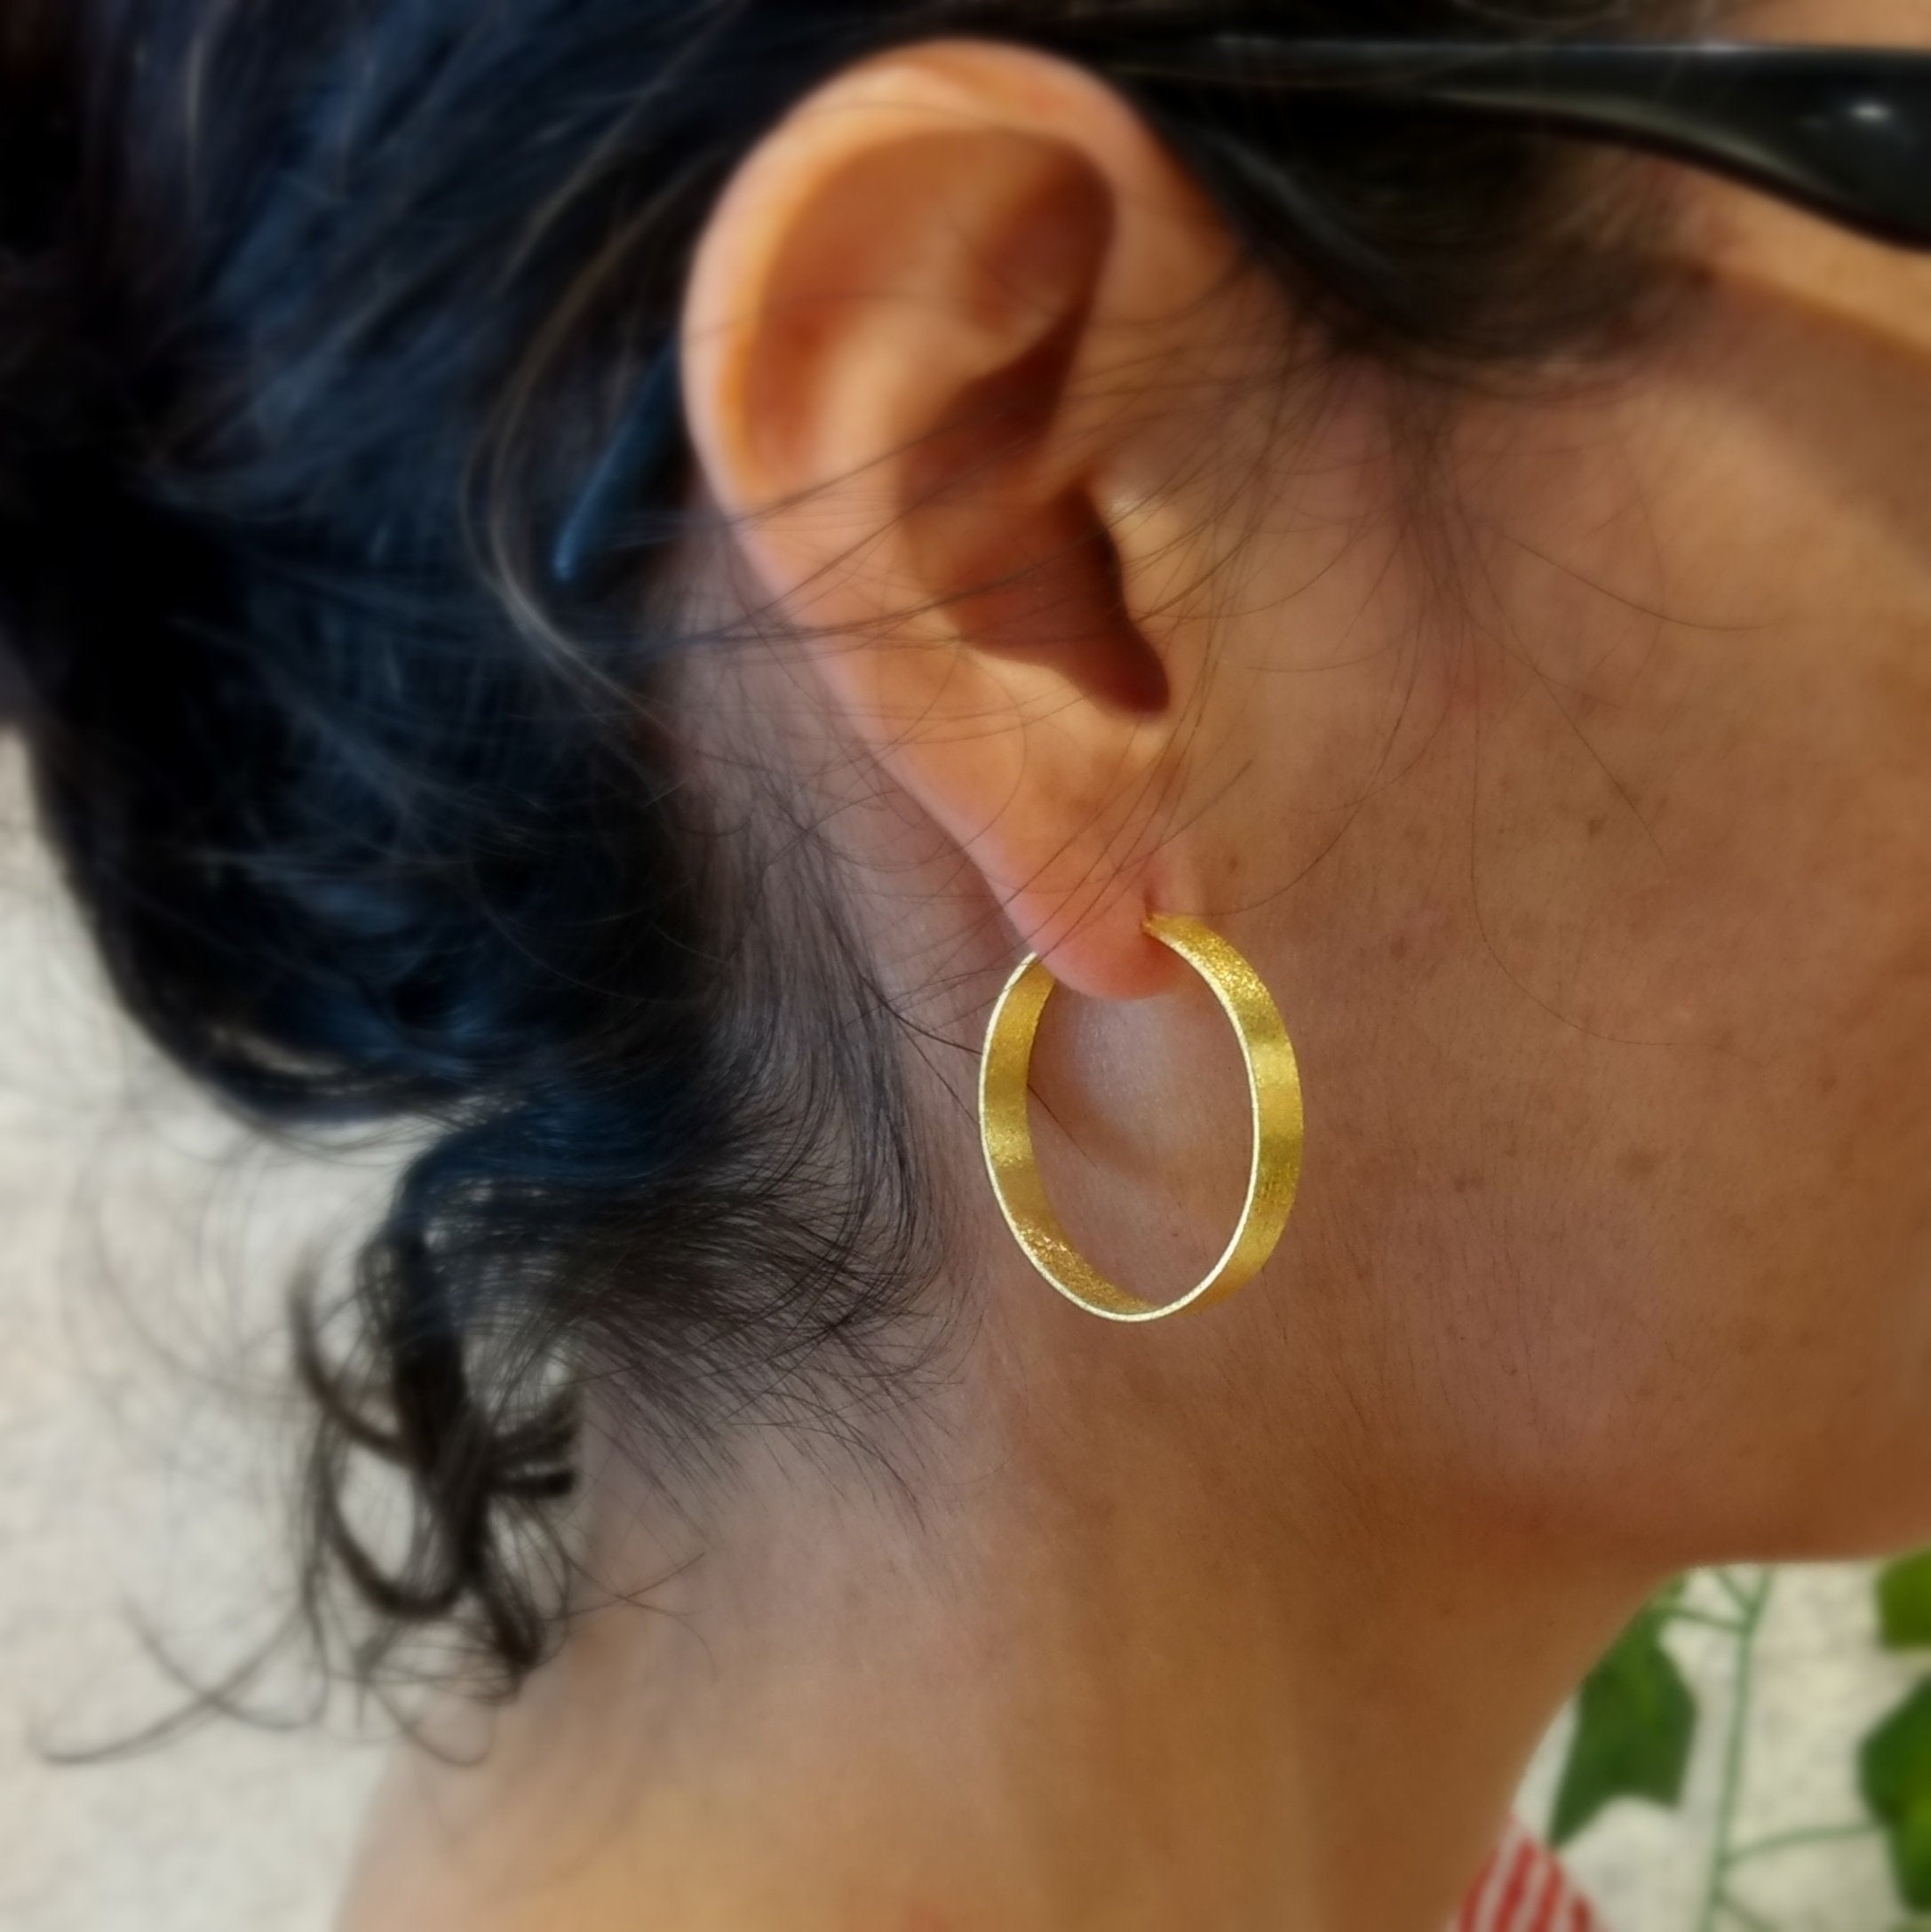 ImNos - big (ø 30 mm), broad Sterling Silver hoops, rhodium or gold plated